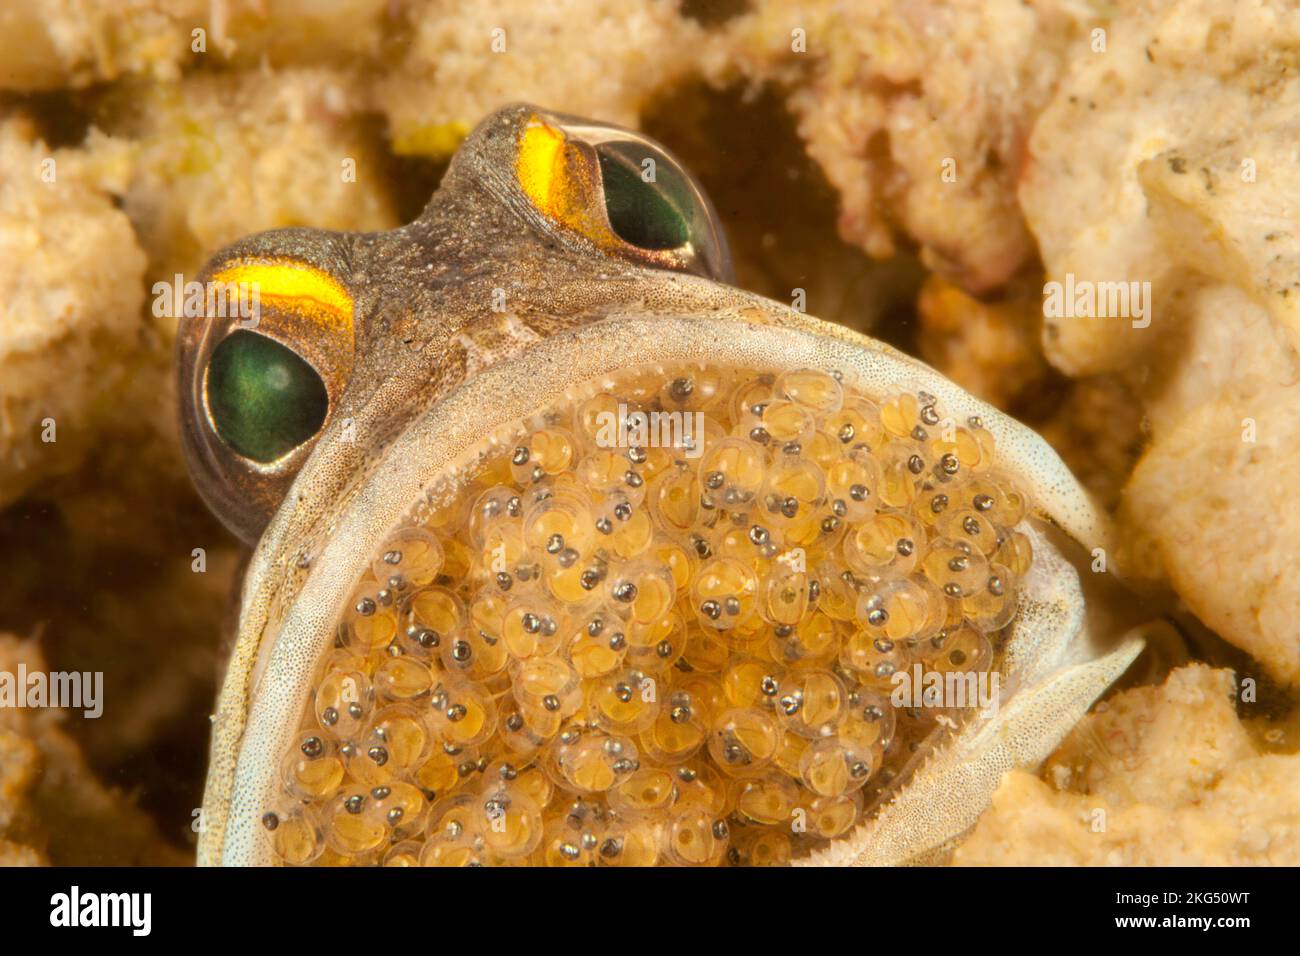 Male gold-specs jawfish, Opistognathus randalli, with mouth brooding eggs, also known as the yellow barred jawfish, Mabul Island, Malaysia. The eyes c Stock Photo